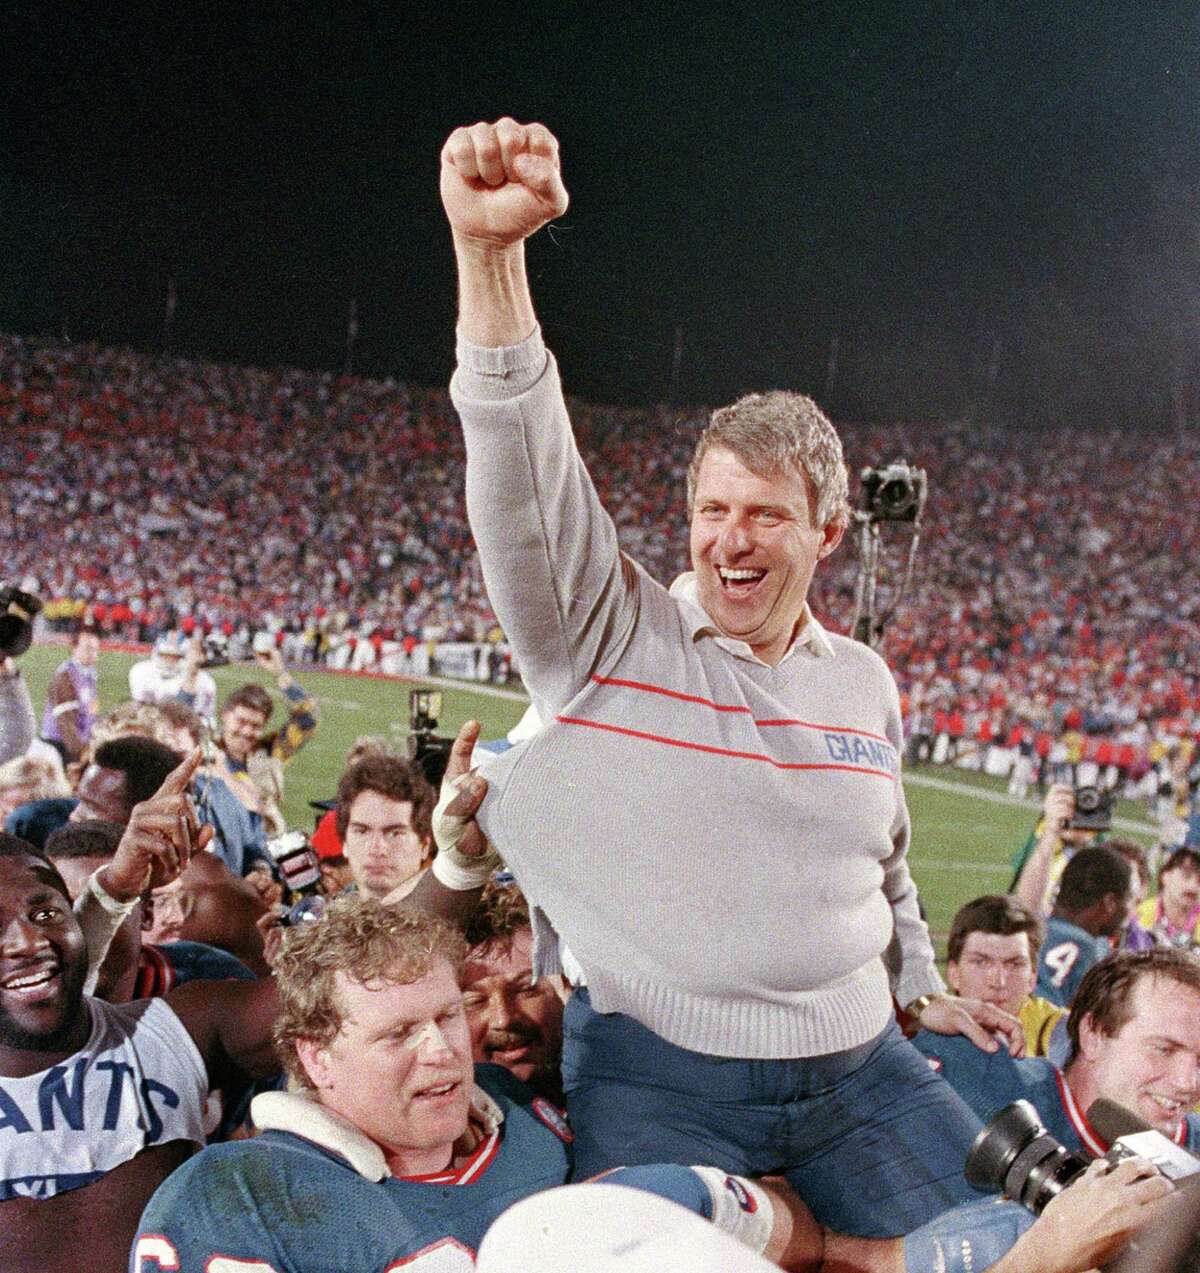 FILE - In this Jan. 25, 1987, file photo, New York Giants coach Bill Parcells is carried off the field after the Giants defeated the Denver Broncos, 39-20, in Super Bowl XXI in Pasadena, Ca. Parcells will enter the Pro Football Hall of Fame in Canton, Ohio, Sunday, Aug. 4, 2013. (AP Photo/Eric Risberg, File) ORG XMIT: NYR104